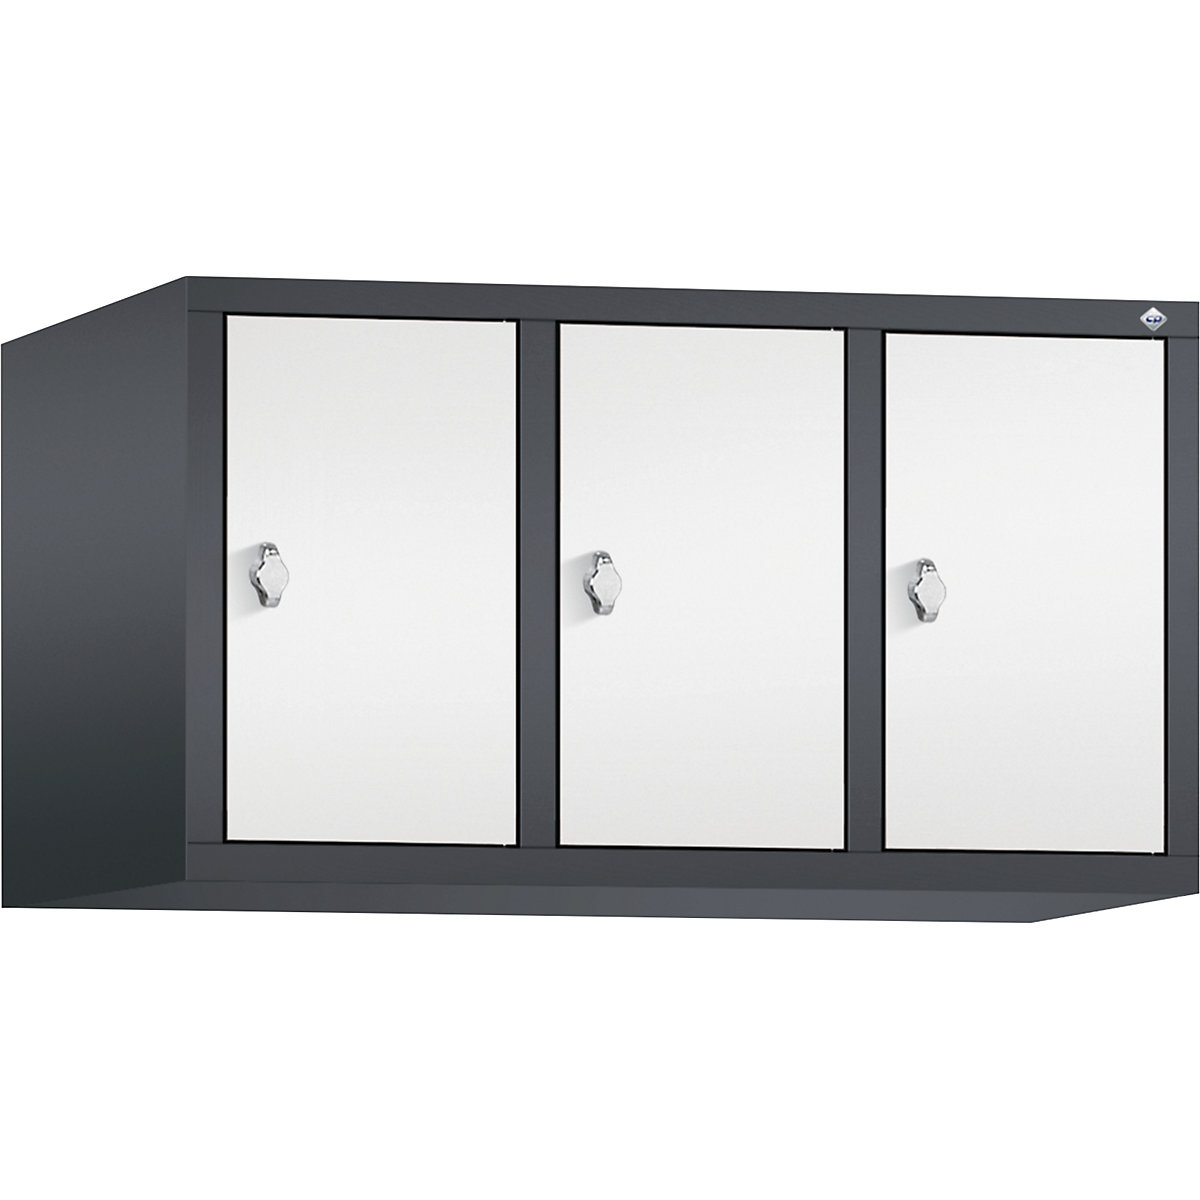 CLASSIC add-on cupboard – C+P, 3 compartments, compartment width 300 mm, black grey / traffic white-9